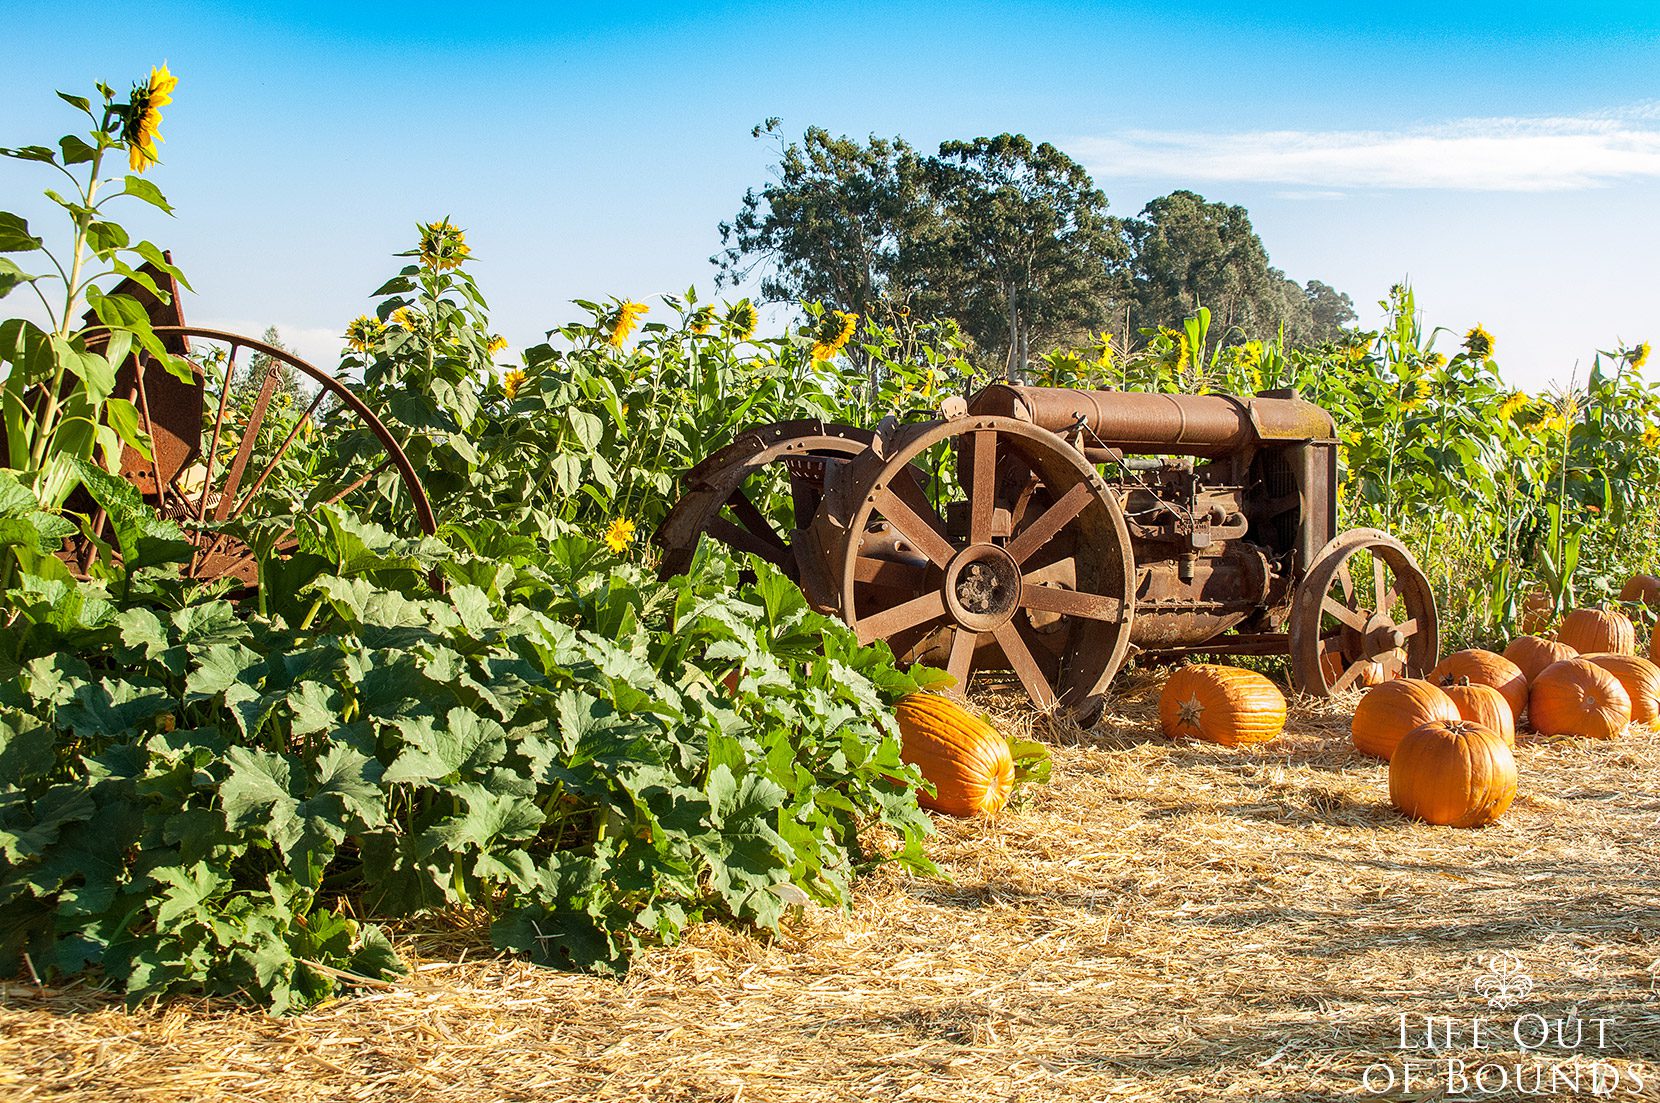 Vintage-tractor-at-a-pumpkin-patch-in-Napa-California